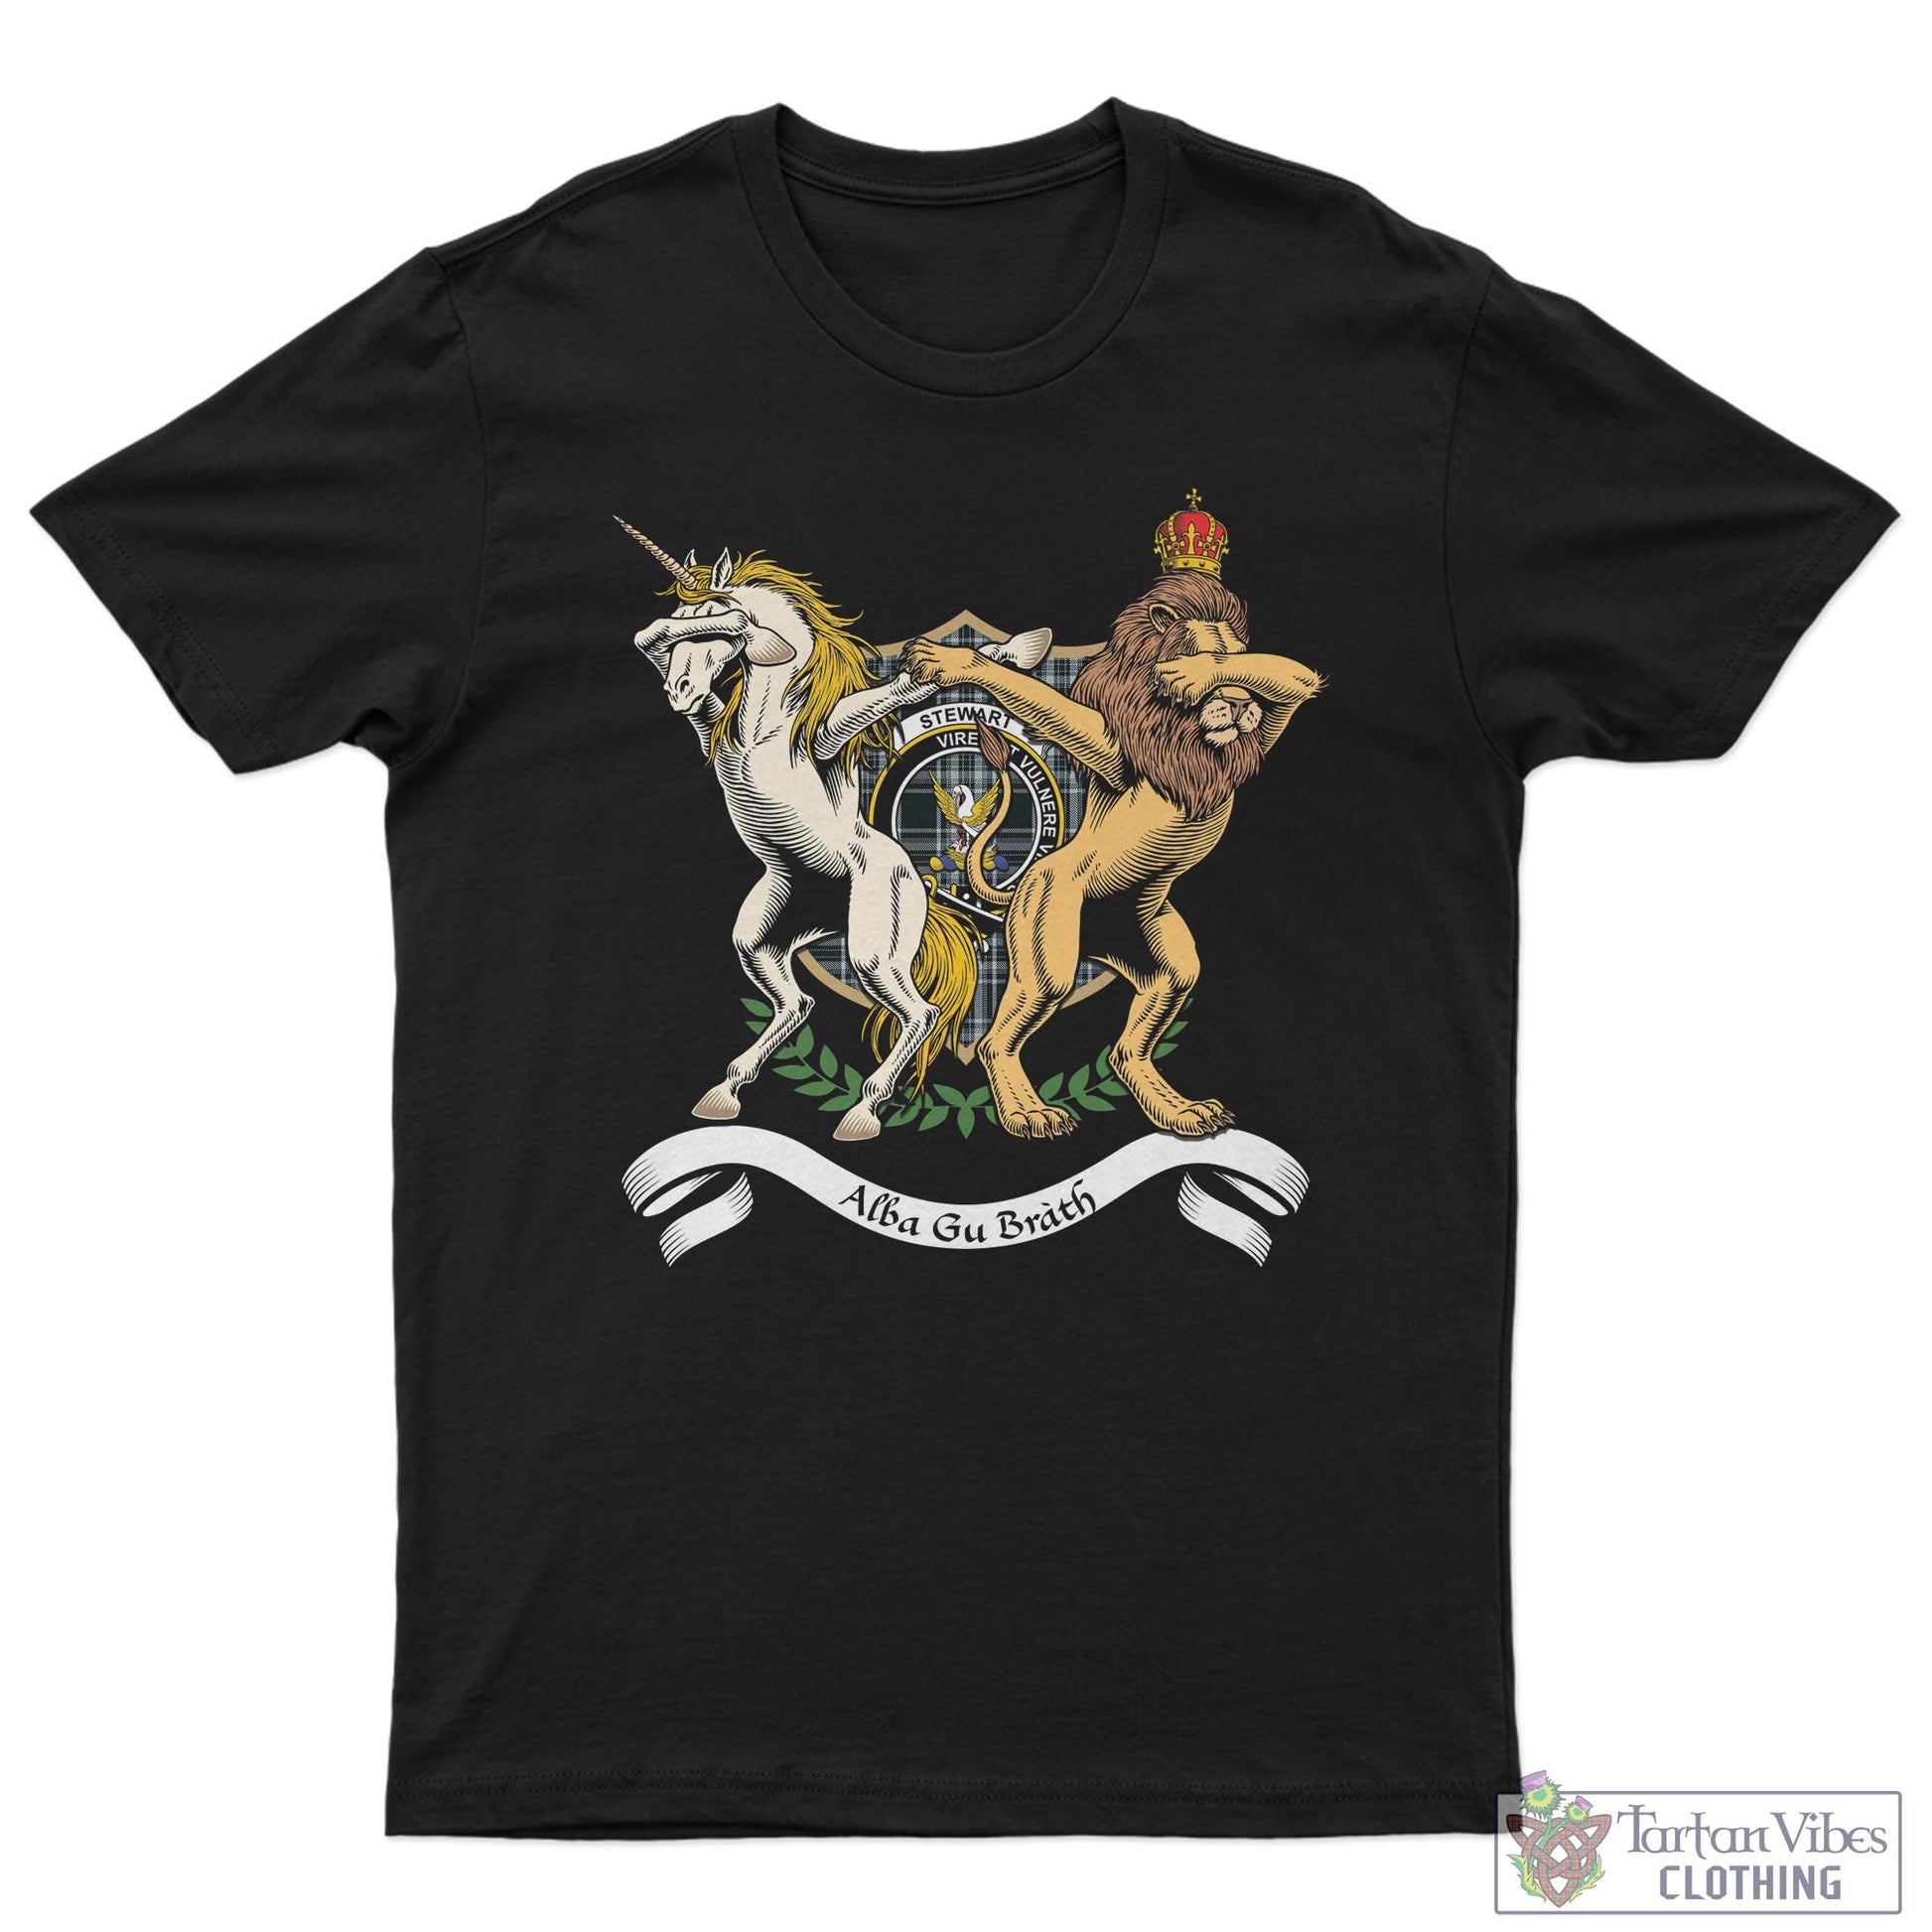 Tartan Vibes Clothing Stewart Black and White Family Crest Cotton Men's T-Shirt with Scotland Royal Coat Of Arm Funny Style